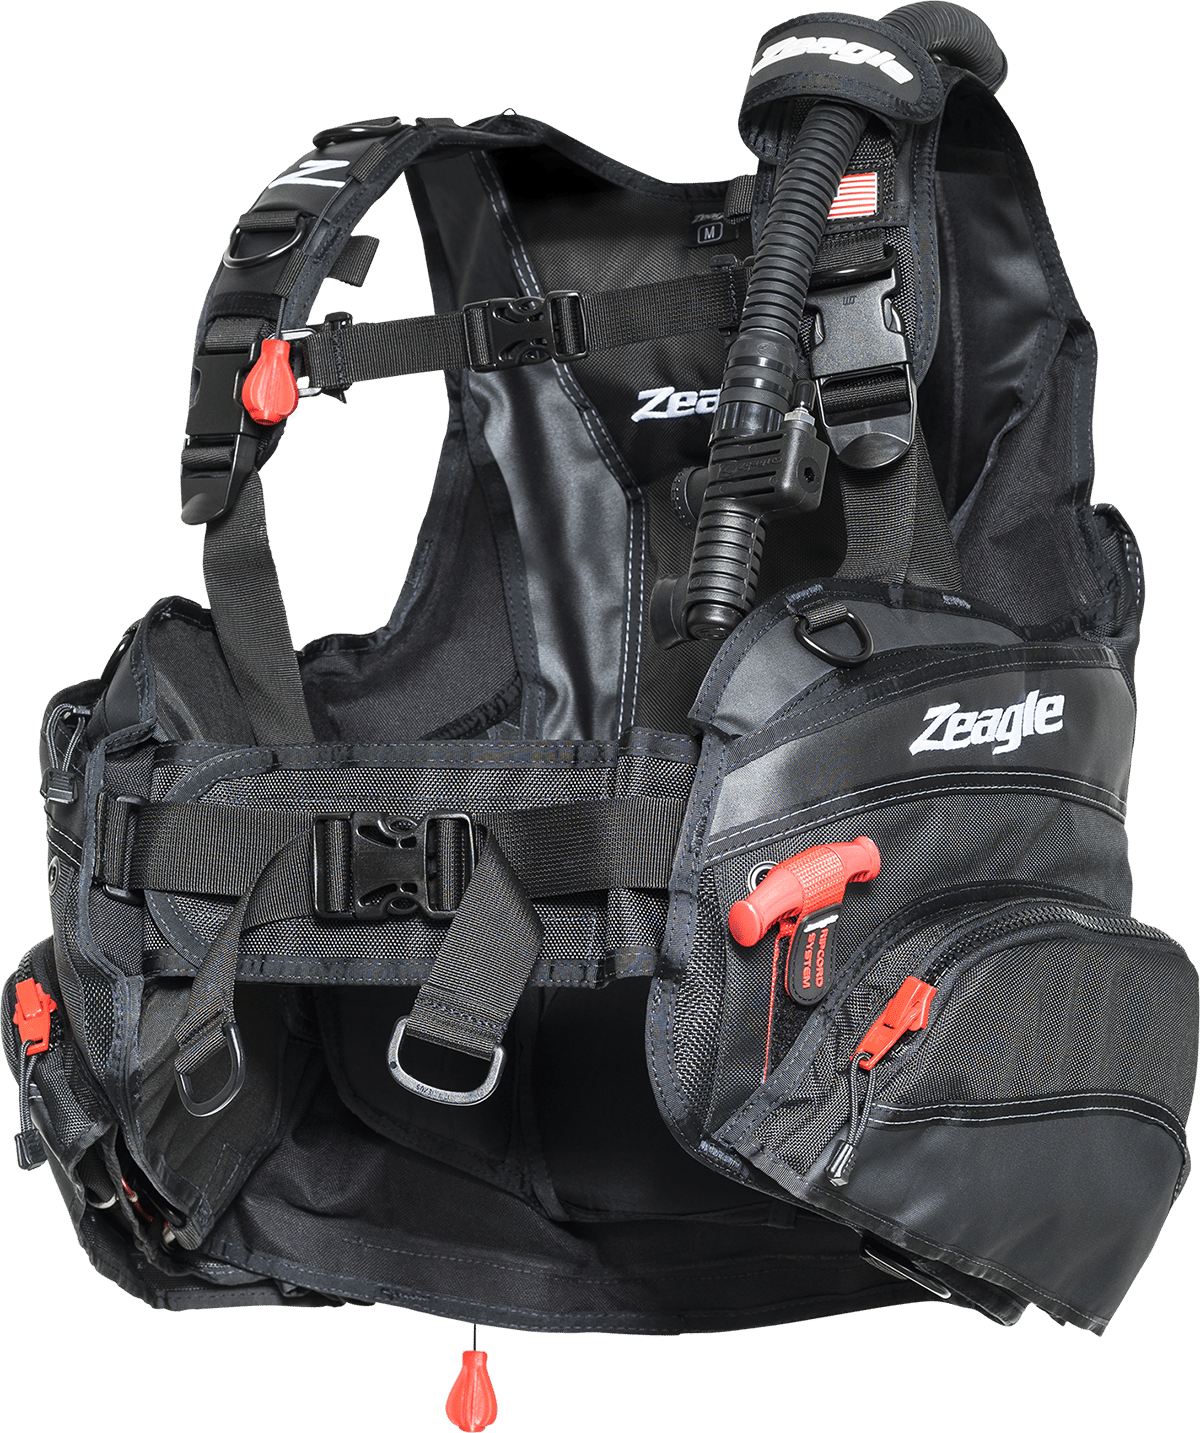 Zeagle's Halo BCD